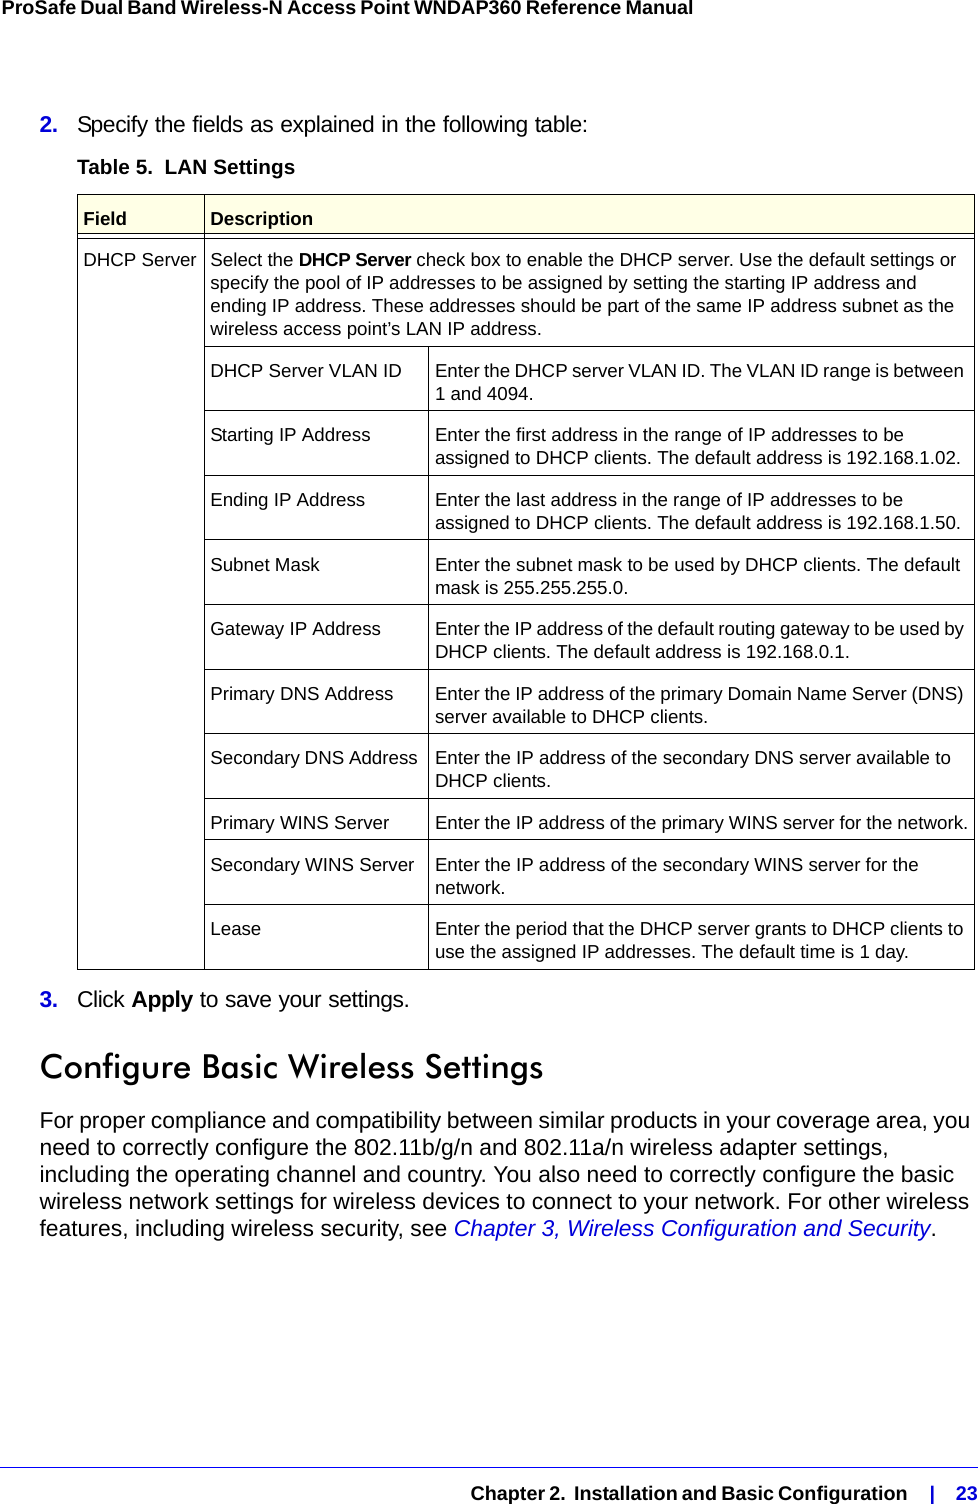   Chapter 2.  Installation and Basic Configuration    |    23ProSafe Dual Band Wireless-N Access Point WNDAP360 Reference Manual 2.  Specify the fields as explained in the following table:3.  Click Apply to save your settings.Configure Basic Wireless SettingsFor proper compliance and compatibility between similar products in your coverage area, you need to correctly configure the 802.11b/g/n and 802.11a/n wireless adapter settings, including the operating channel and country. You also need to correctly configure the basic wireless network settings for wireless devices to connect to your network. For other wireless features, including wireless security, see Chapter 3, Wireless Configuration and Security.Table 5.  LAN Settings Field  DescriptionDHCP Server Select the DHCP Server check box to enable the DHCP server. Use the default settings or specify the pool of IP addresses to be assigned by setting the starting IP address and ending IP address. These addresses should be part of the same IP address subnet as the wireless access point’s LAN IP address.DHCP Server VLAN ID Enter the DHCP server VLAN ID. The VLAN ID range is between 1 and 4094.Starting IP Address Enter the first address in the range of IP addresses to be assigned to DHCP clients. The default address is 192.168.1.02.Ending IP Address Enter the last address in the range of IP addresses to be assigned to DHCP clients. The default address is 192.168.1.50.Subnet Mask Enter the subnet mask to be used by DHCP clients. The default mask is 255.255.255.0.Gateway IP Address Enter the IP address of the default routing gateway to be used by DHCP clients. The default address is 192.168.0.1.Primary DNS Address  Enter the IP address of the primary Domain Name Server (DNS) server available to DHCP clients.Secondary DNS Address  Enter the IP address of the secondary DNS server available to DHCP clients.Primary WINS Server Enter the IP address of the primary WINS server for the network.Secondary WINS Server Enter the IP address of the secondary WINS server for the network.Lease Enter the period that the DHCP server grants to DHCP clients to use the assigned IP addresses. The default time is 1 day.